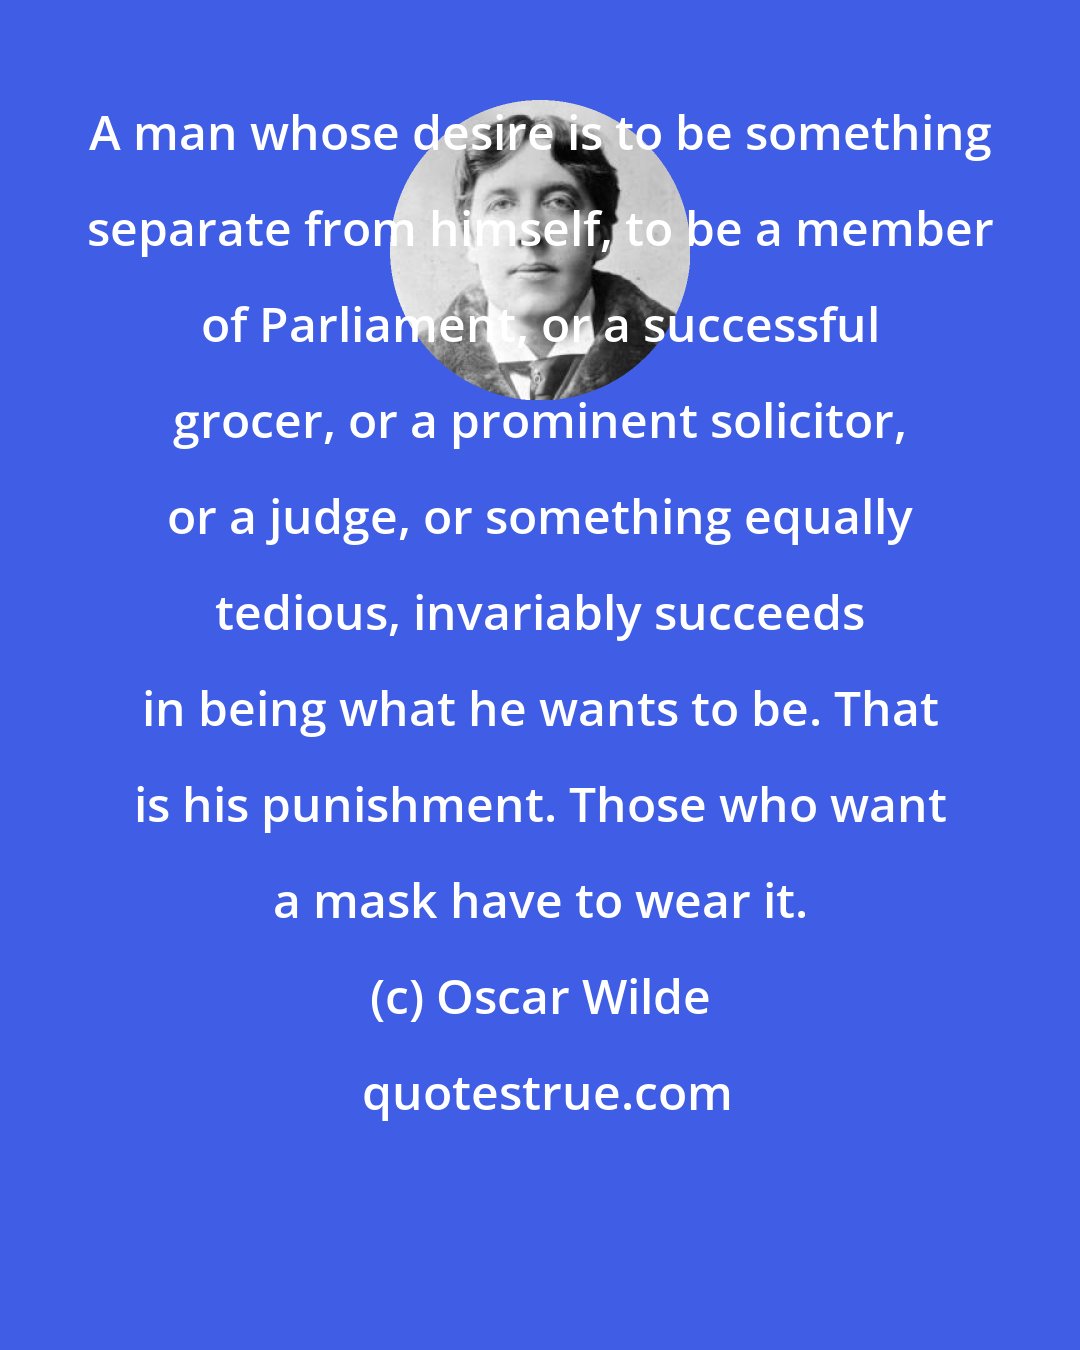 Oscar Wilde: A man whose desire is to be something separate from himself, to be a member of Parliament, or a successful grocer, or a prominent solicitor, or a judge, or something equally tedious, invariably succeeds in being what he wants to be. That is his punishment. Those who want a mask have to wear it.